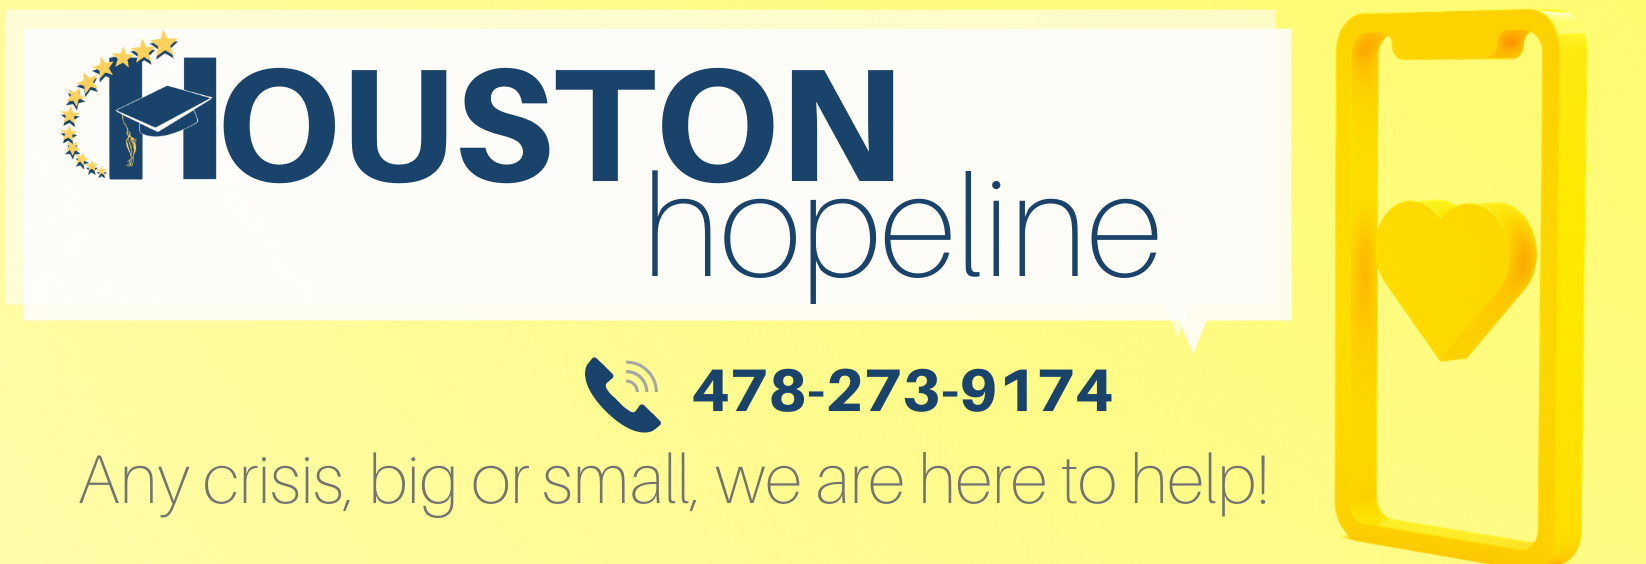 Houston Hopeline 478-273-9174  Any crisis, big or small, we are here to help!